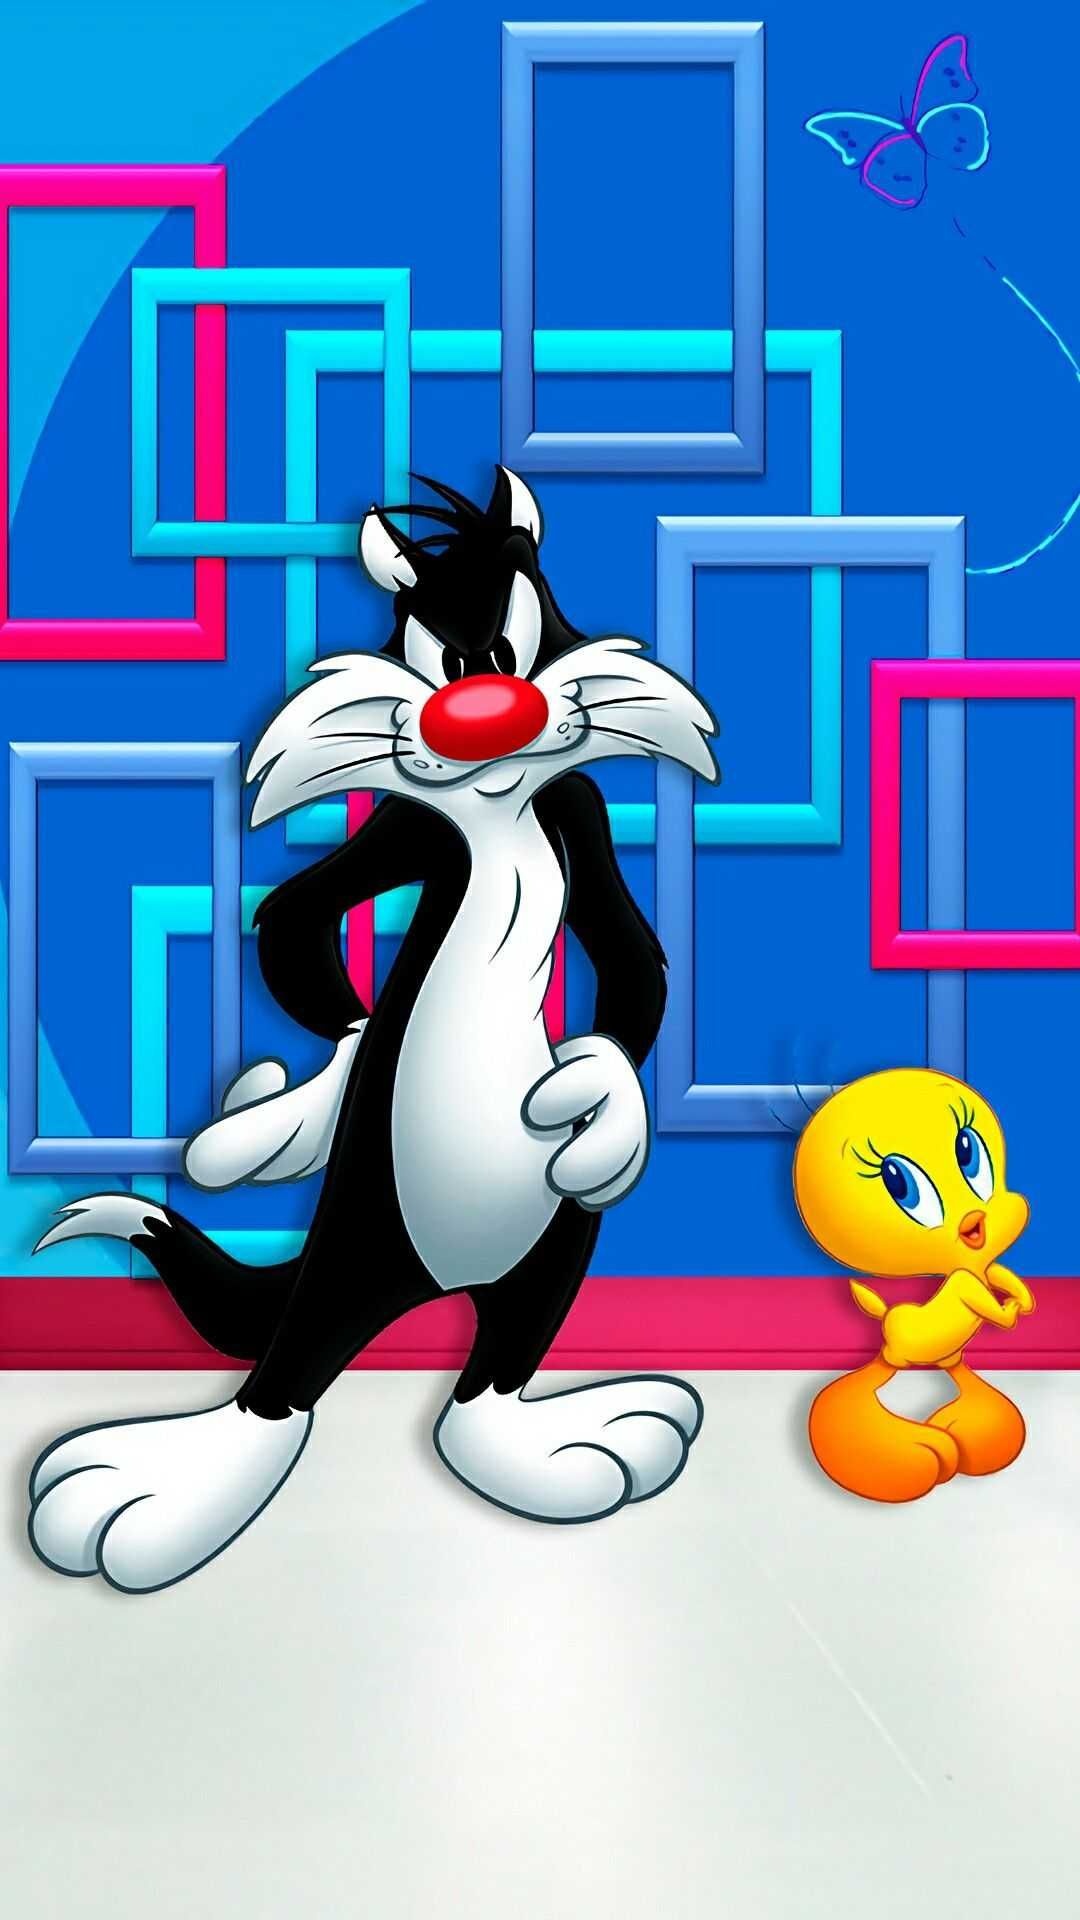 Aesthteic Looney Tunes Wallpaper